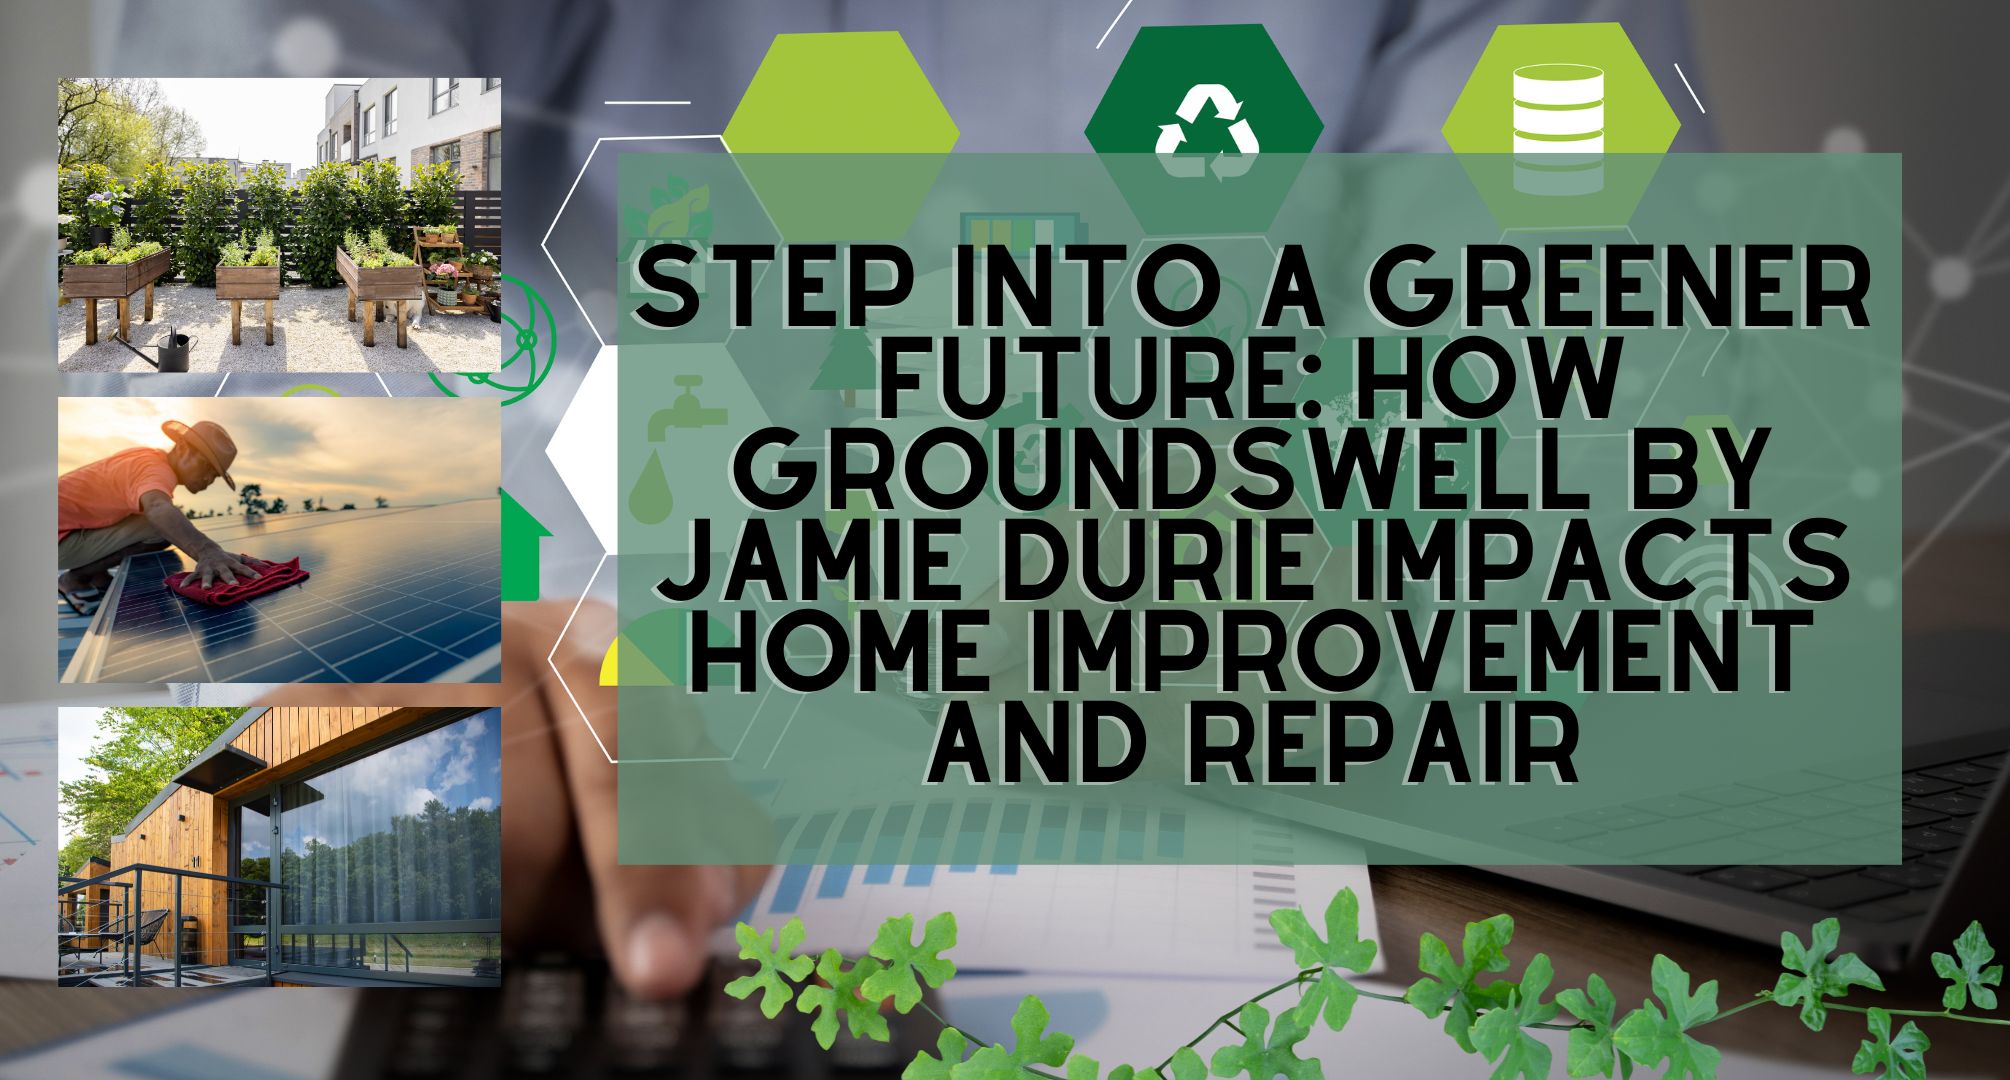 Step into a Greener Future: How Groundswell by Jamie Durie Impacts Home Improvement and Repair